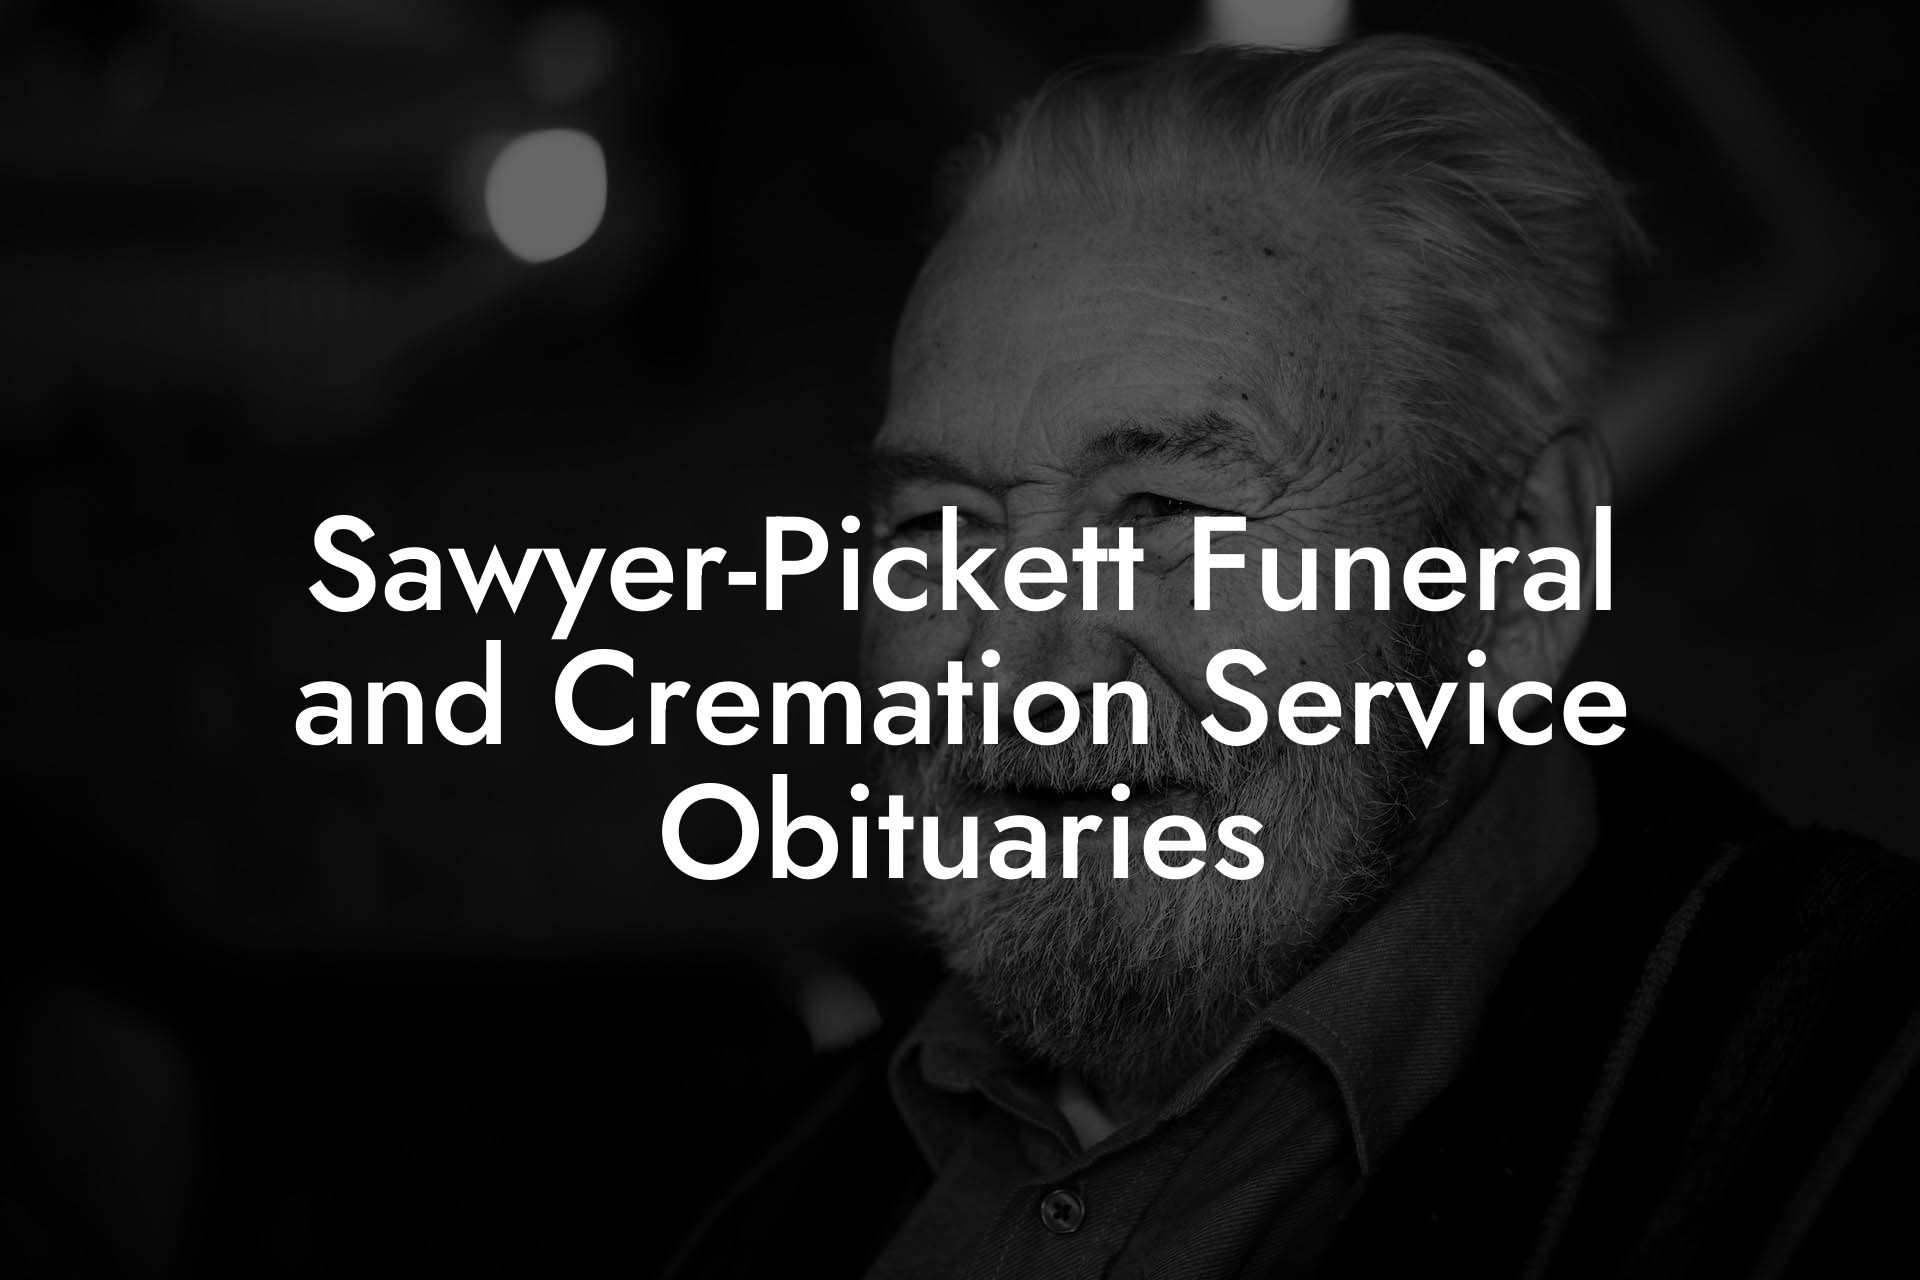 Sawyer-Pickett Funeral and Cremation Service Obituaries